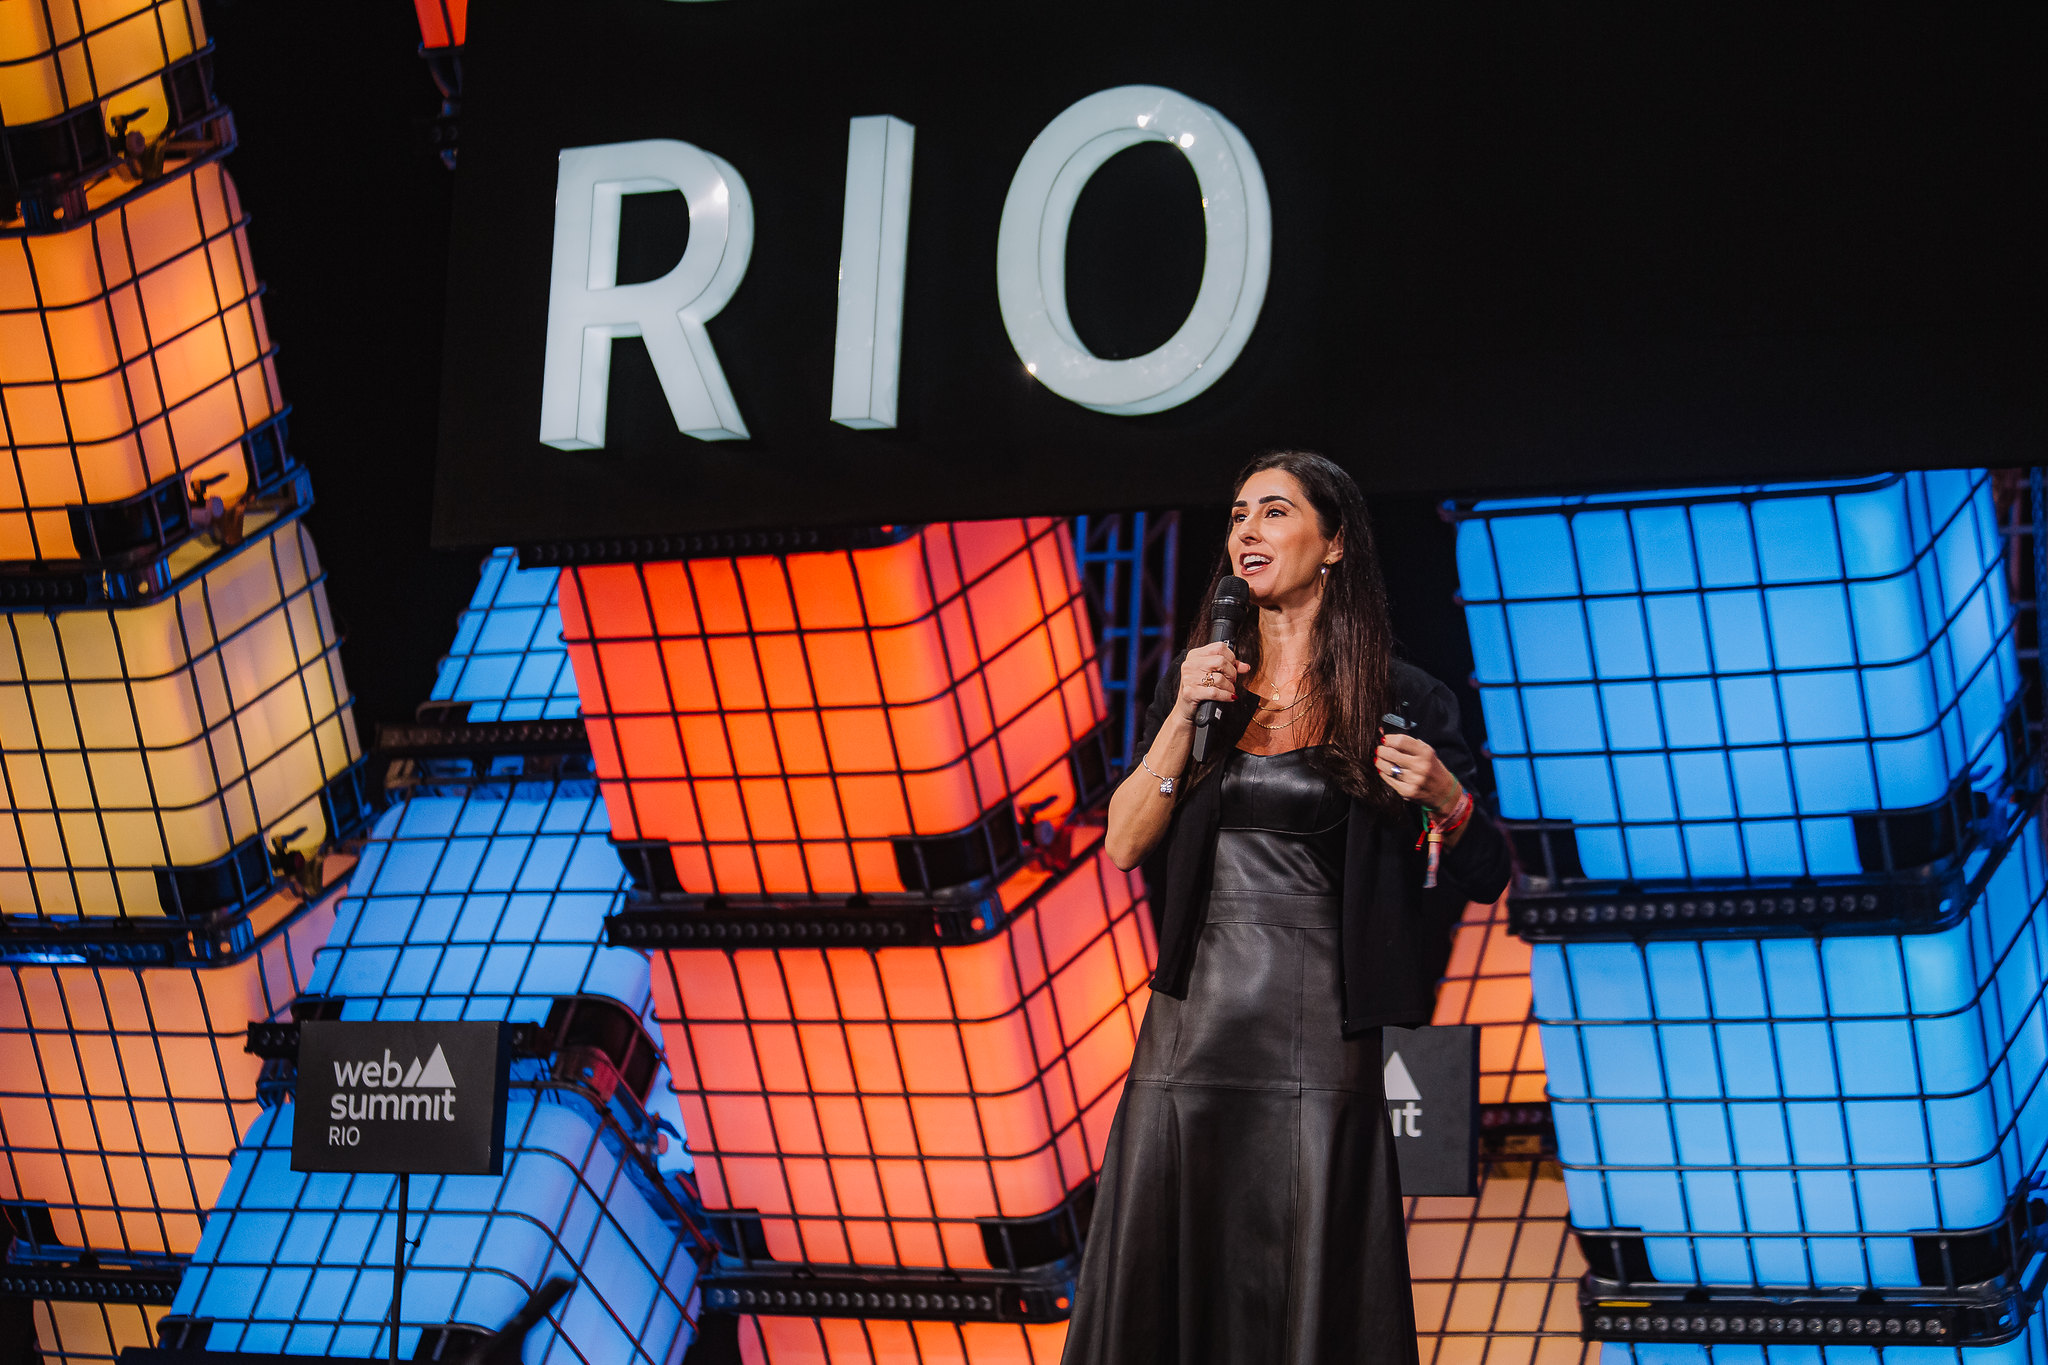 A person (TikTok general manager of global business solutions for LatAm Gabriela Comazzetto) standing on a stage. They are holding a microphone in their right hand, and a presentation clicker in their left. Behind them is a wall of large cuboid water containers, lit from within. Over the head is visible the word 'Rio', part of the Web Summit Rio logo. This is Center Stage at Web Summit Rio.